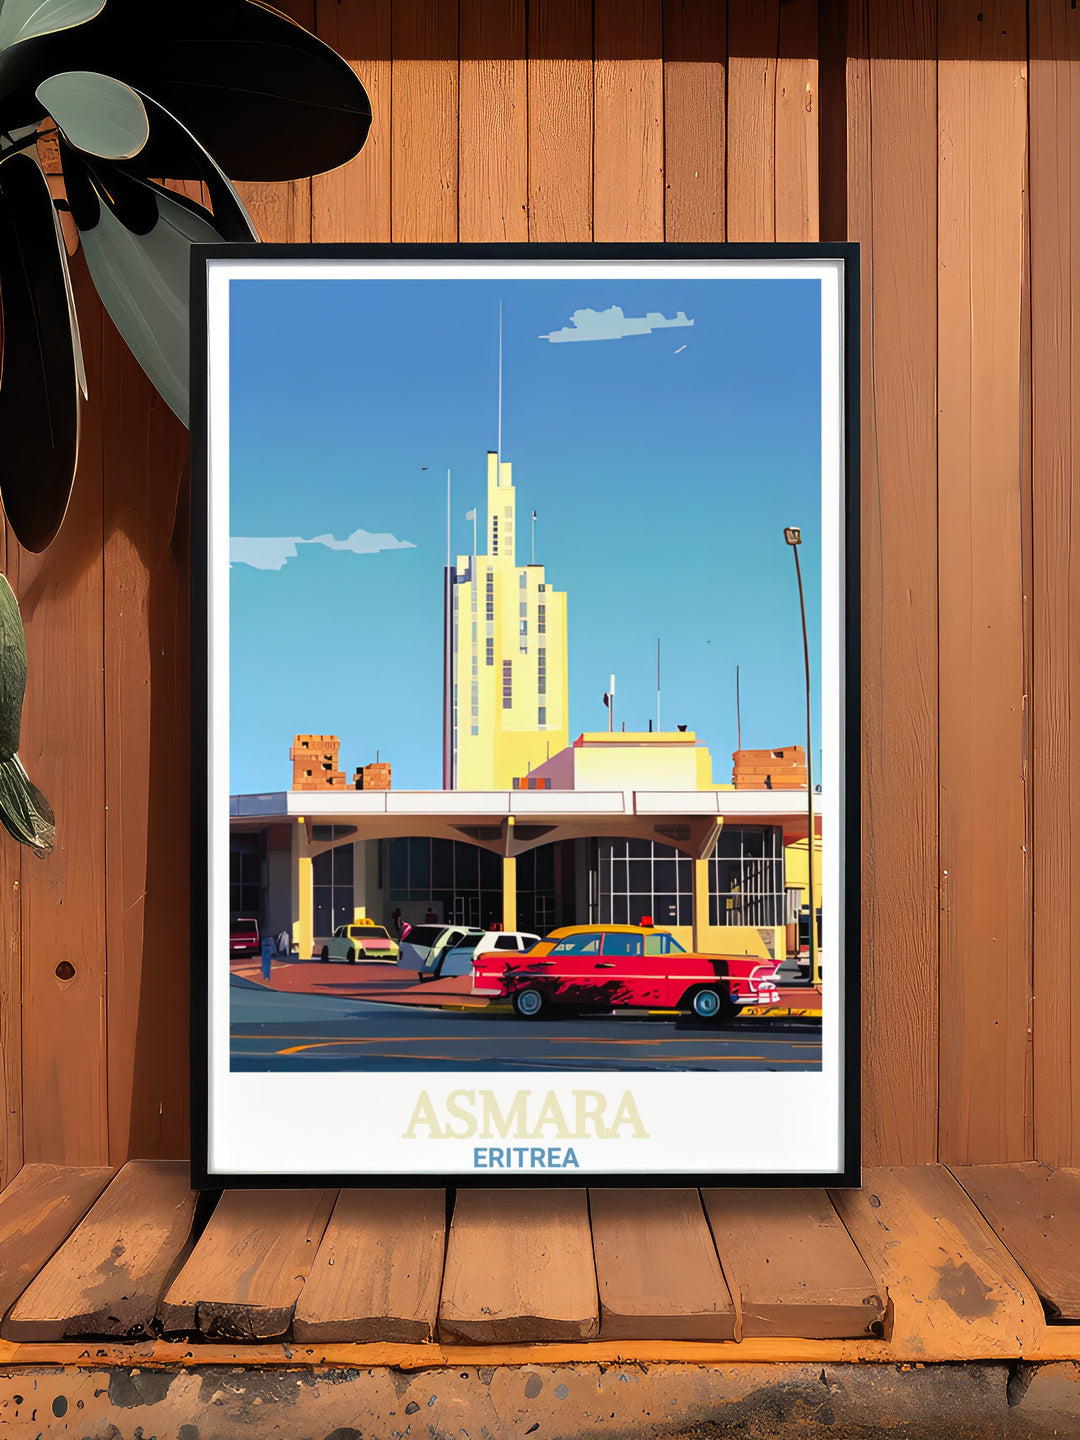 Fiat Tagliero Building captured in stunning prints that emphasize its modernist architecture, ideal for adding sophistication to any living space.